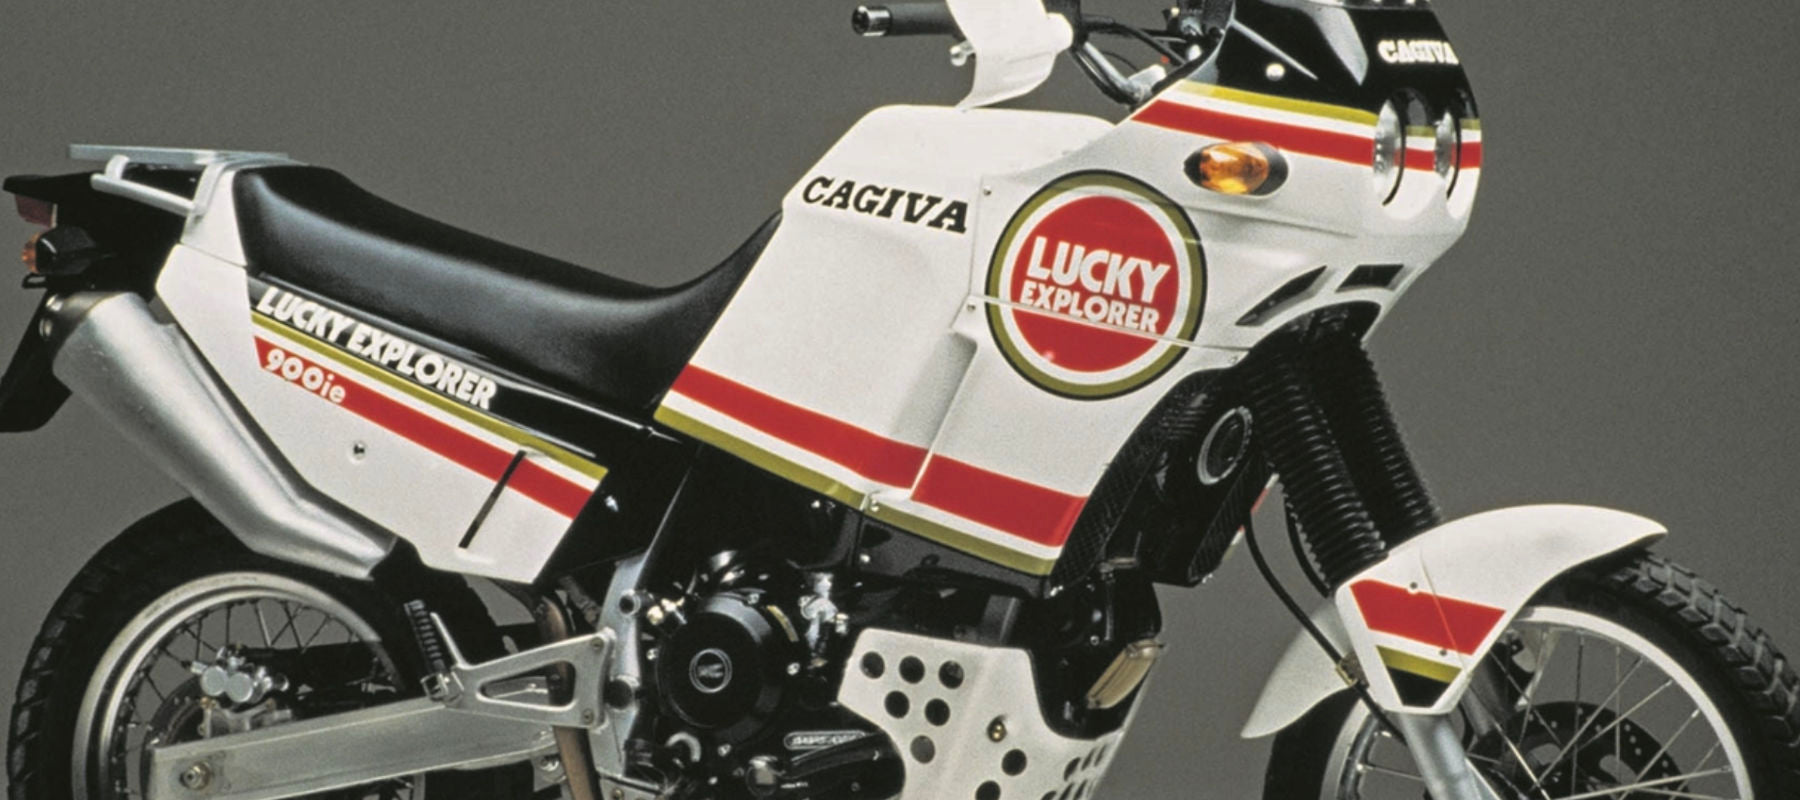 Cagiva Motorcycle Covers